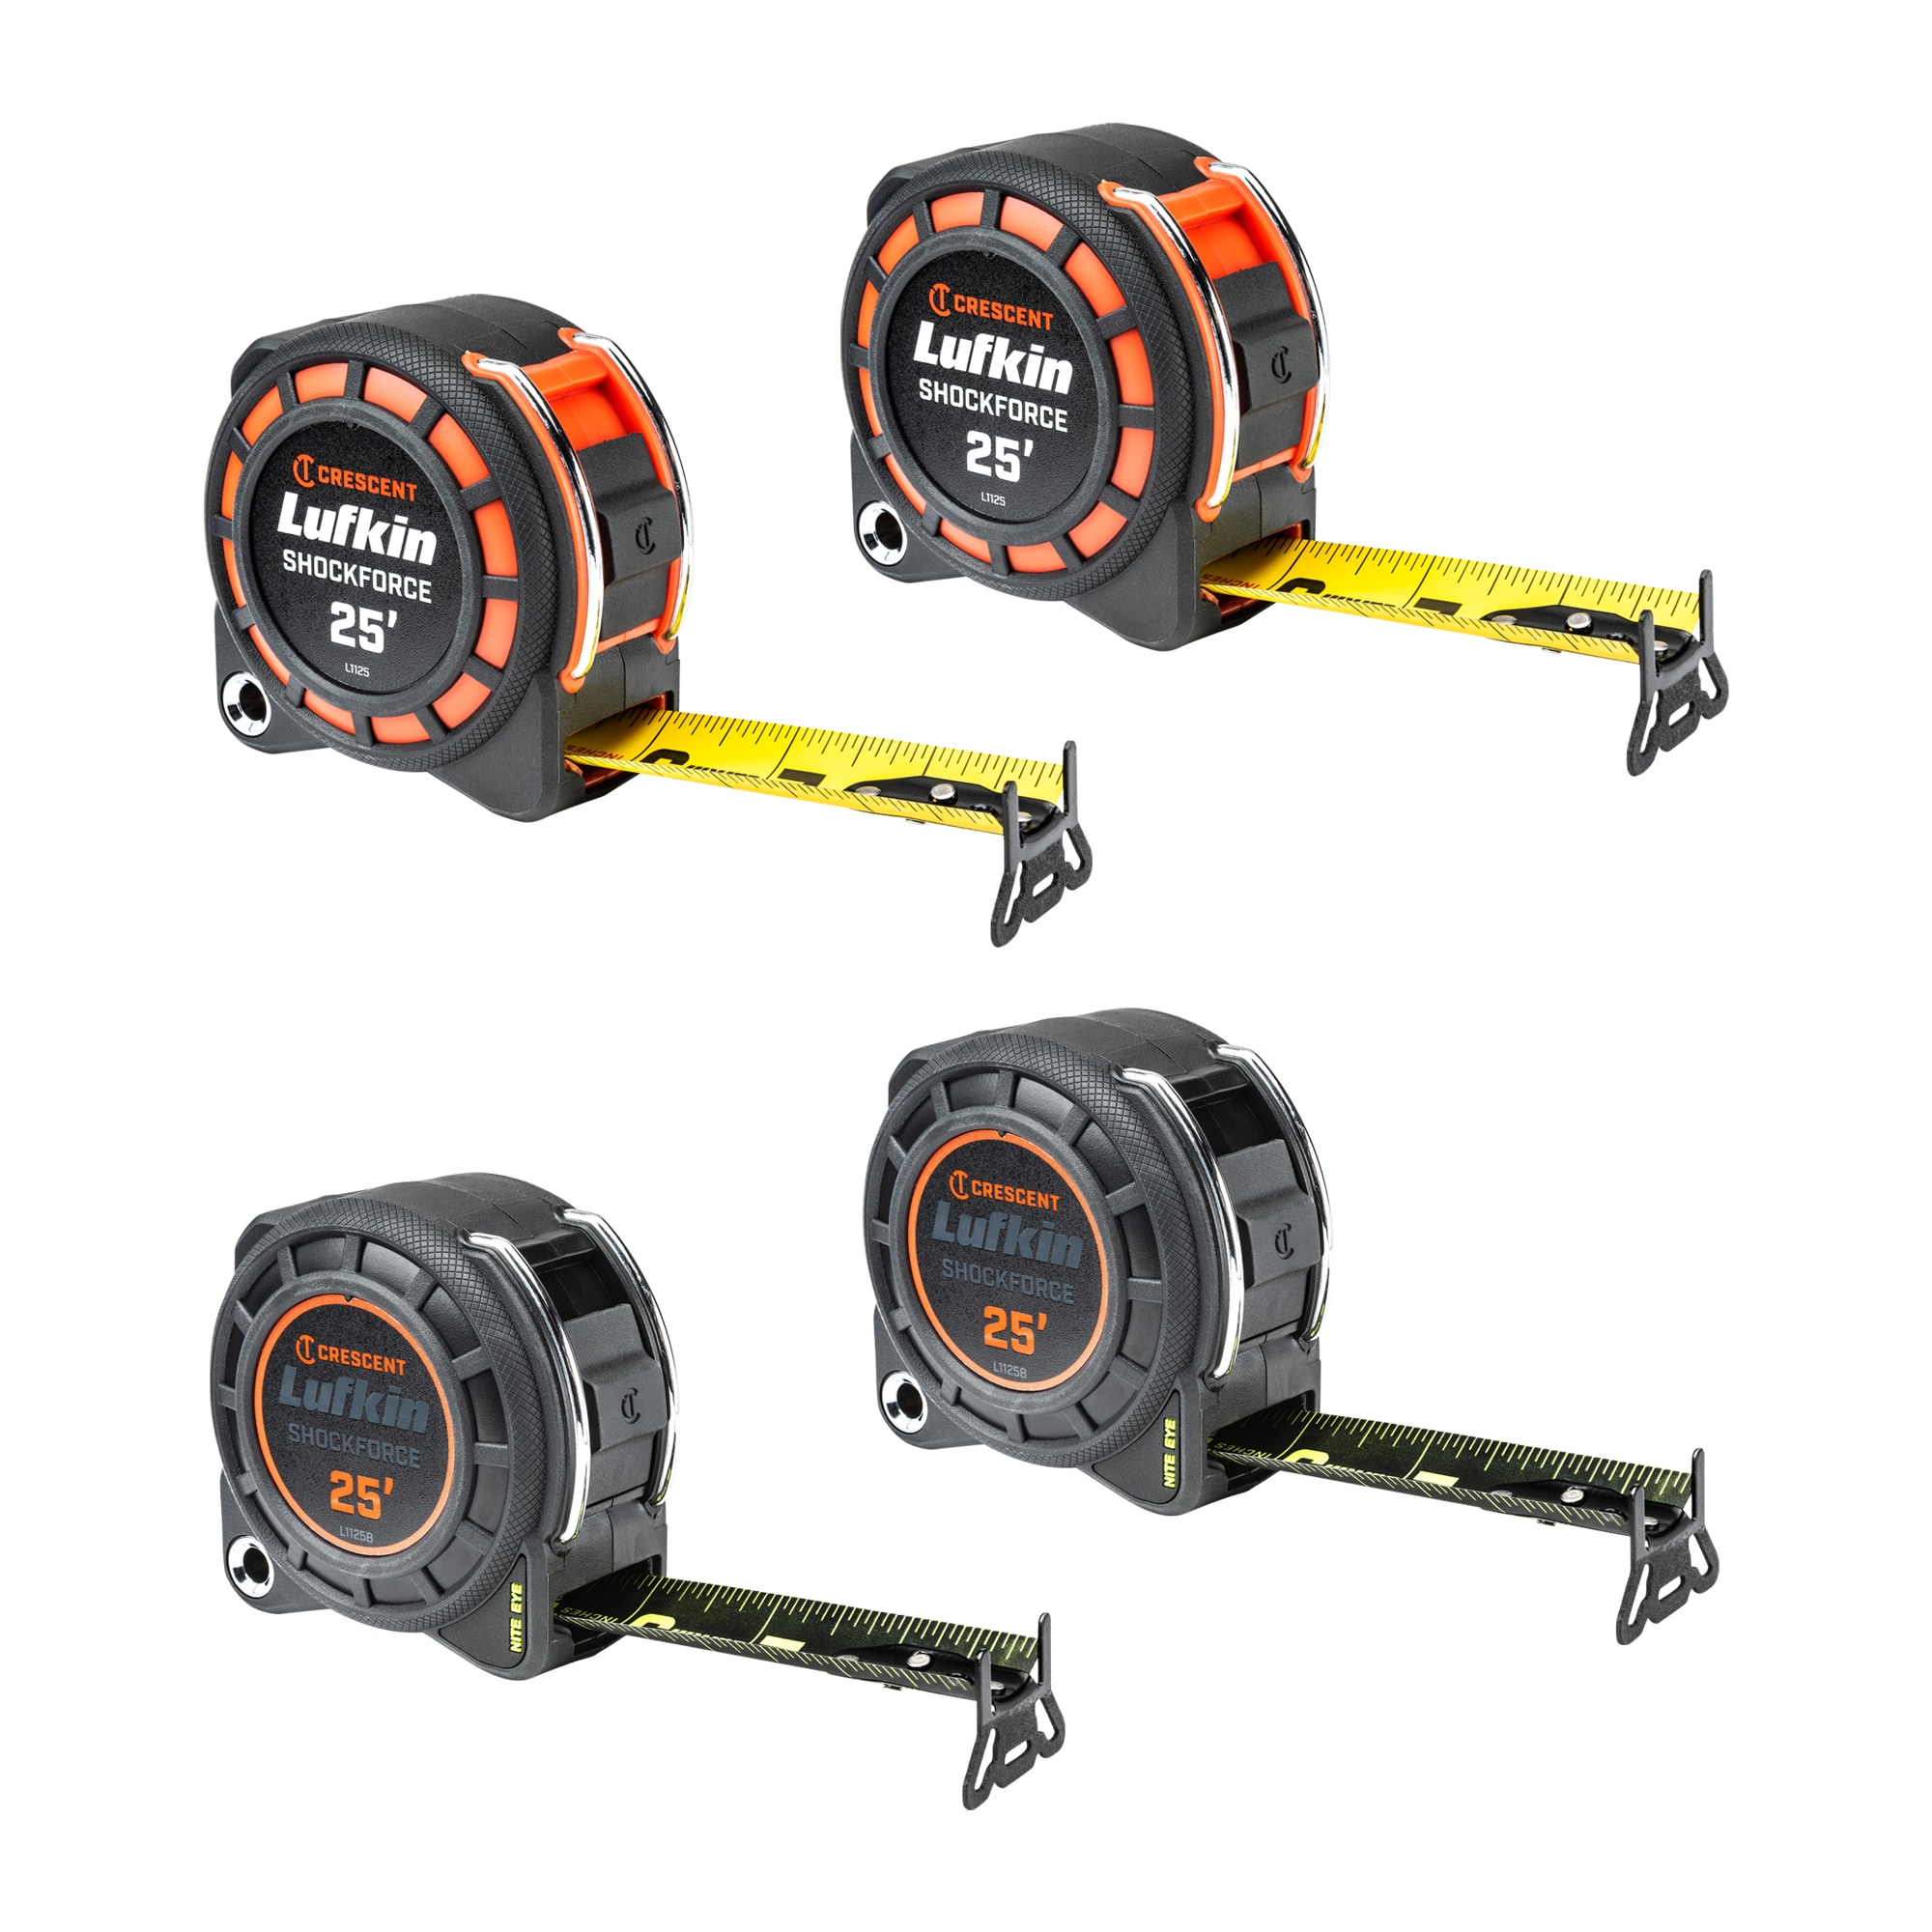 Shop Metric Inch Tape Measure with great discounts and prices online - Nov  2023